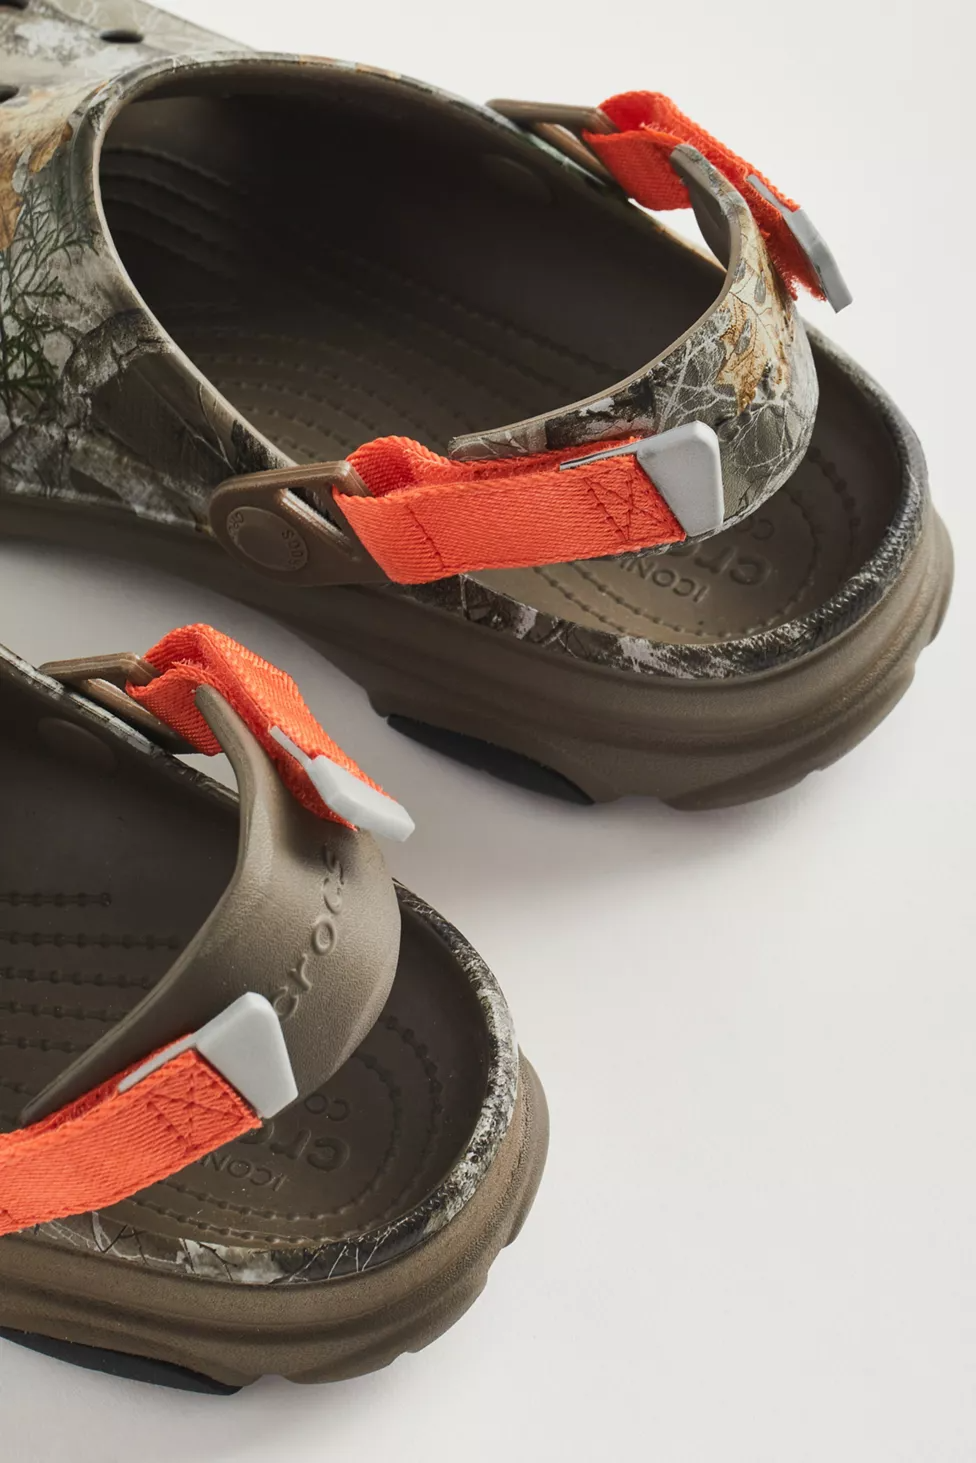 Now Available: Realtree Camo x Crocs All Terrain Clogs — Sneaker Shouts